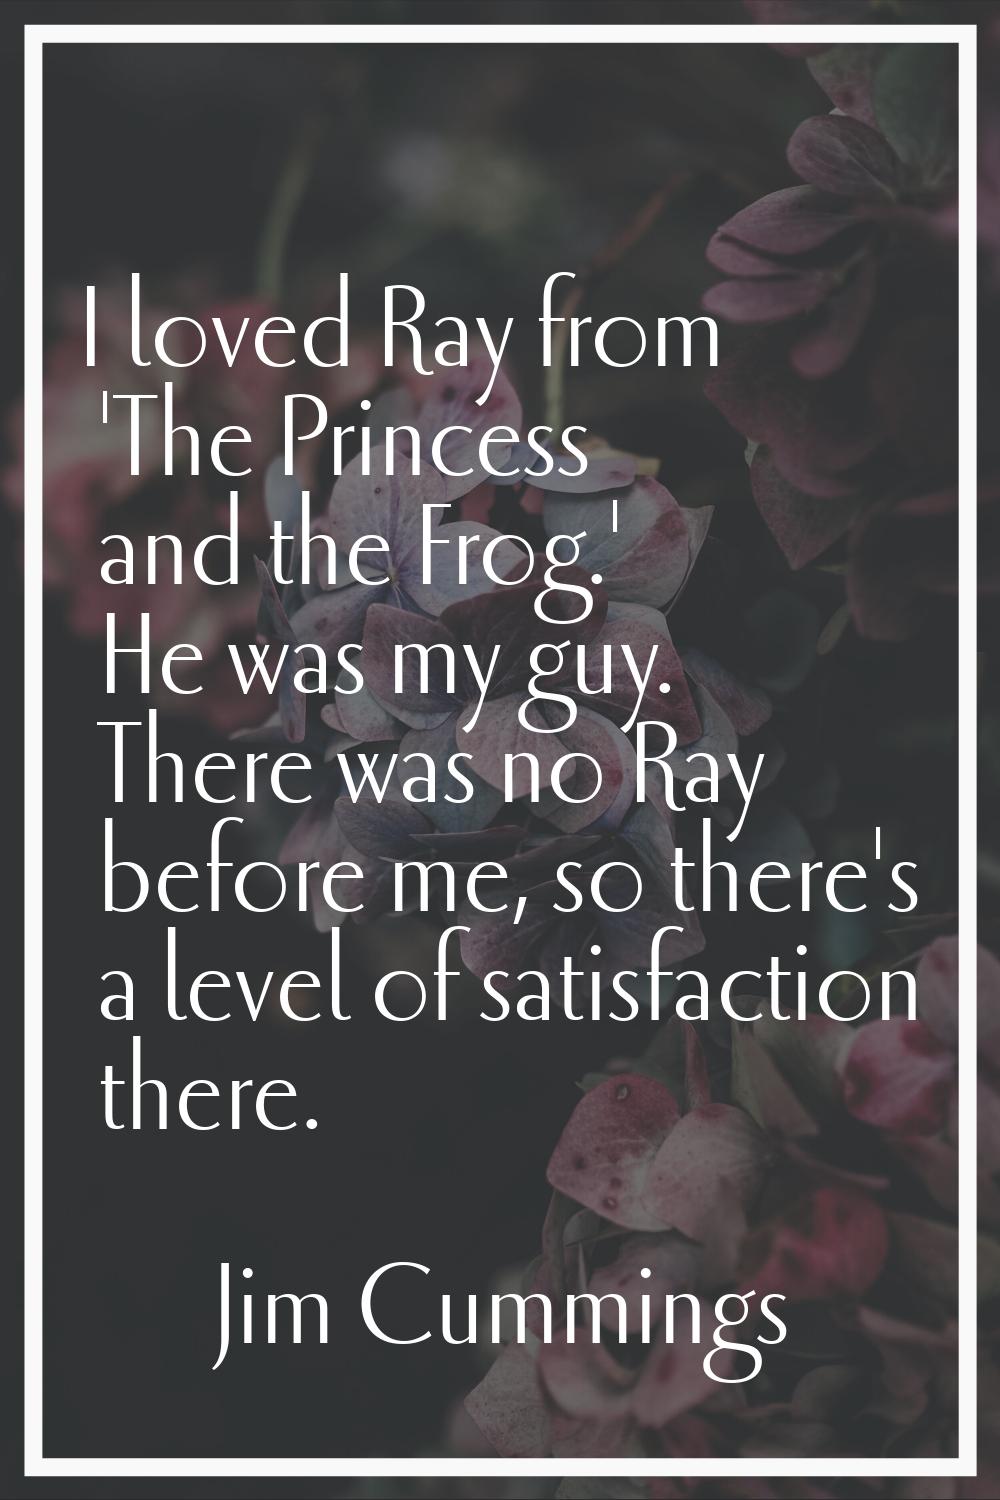 I loved Ray from 'The Princess and the Frog.' He was my guy. There was no Ray before me, so there's